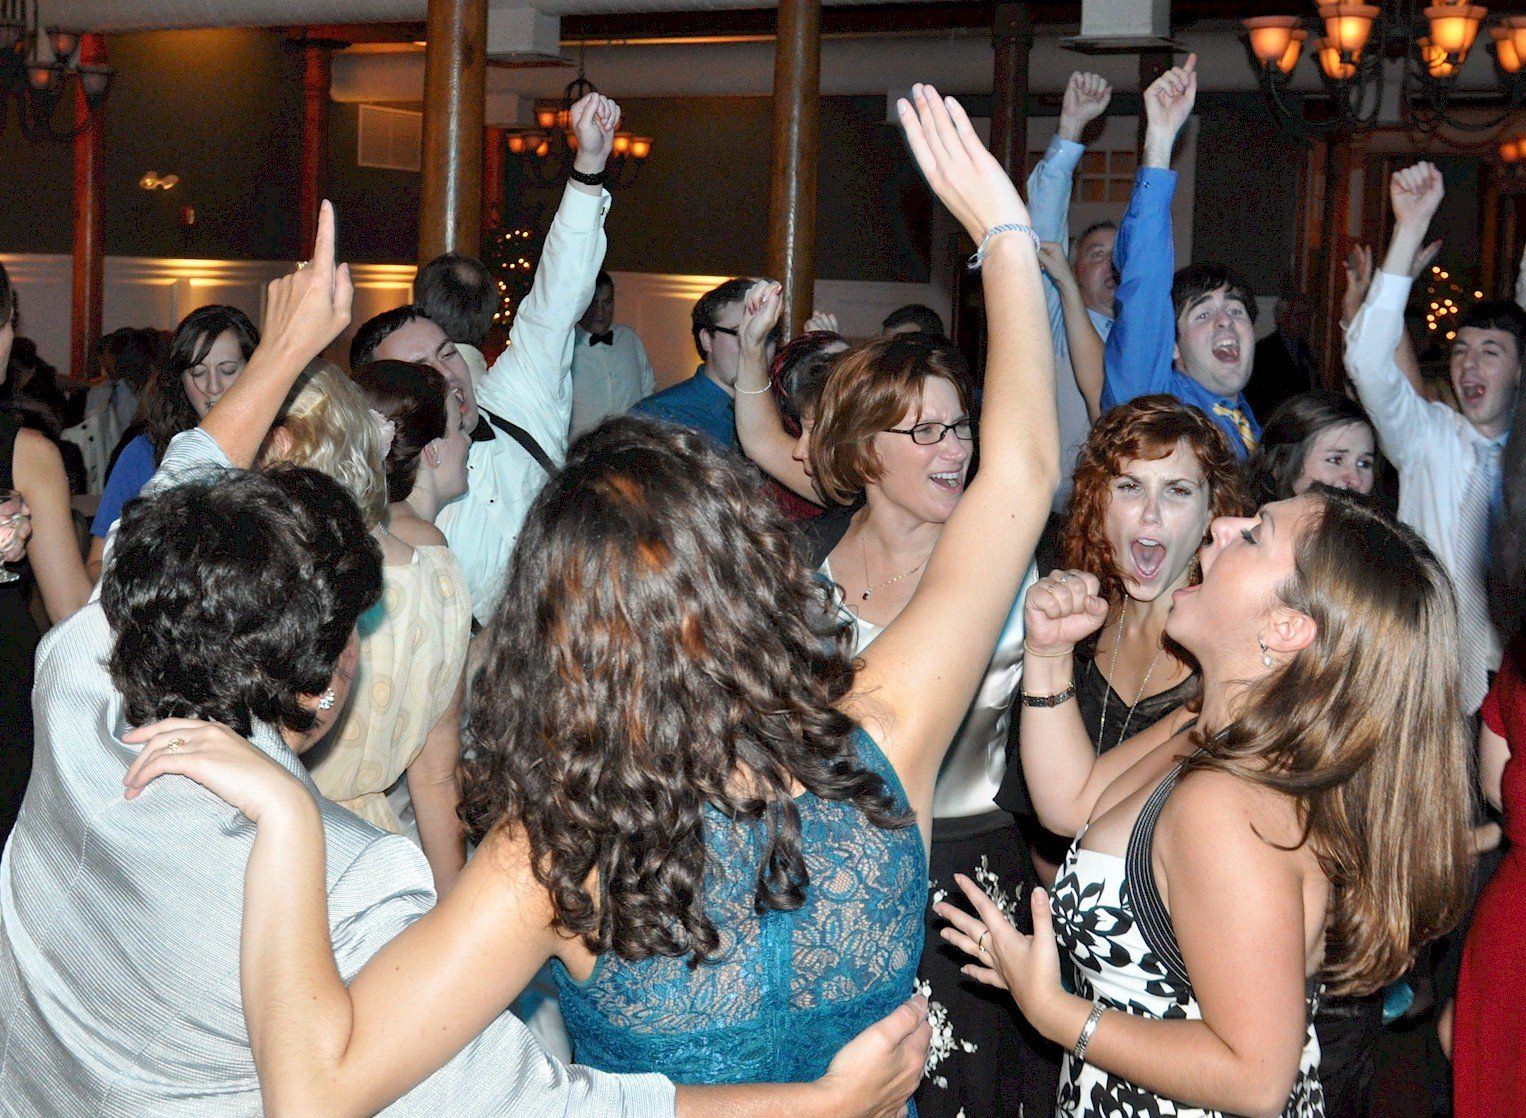 NH wedding DJ guests dancing at Fratellos Italian Grille, Manchester, New Hampshire